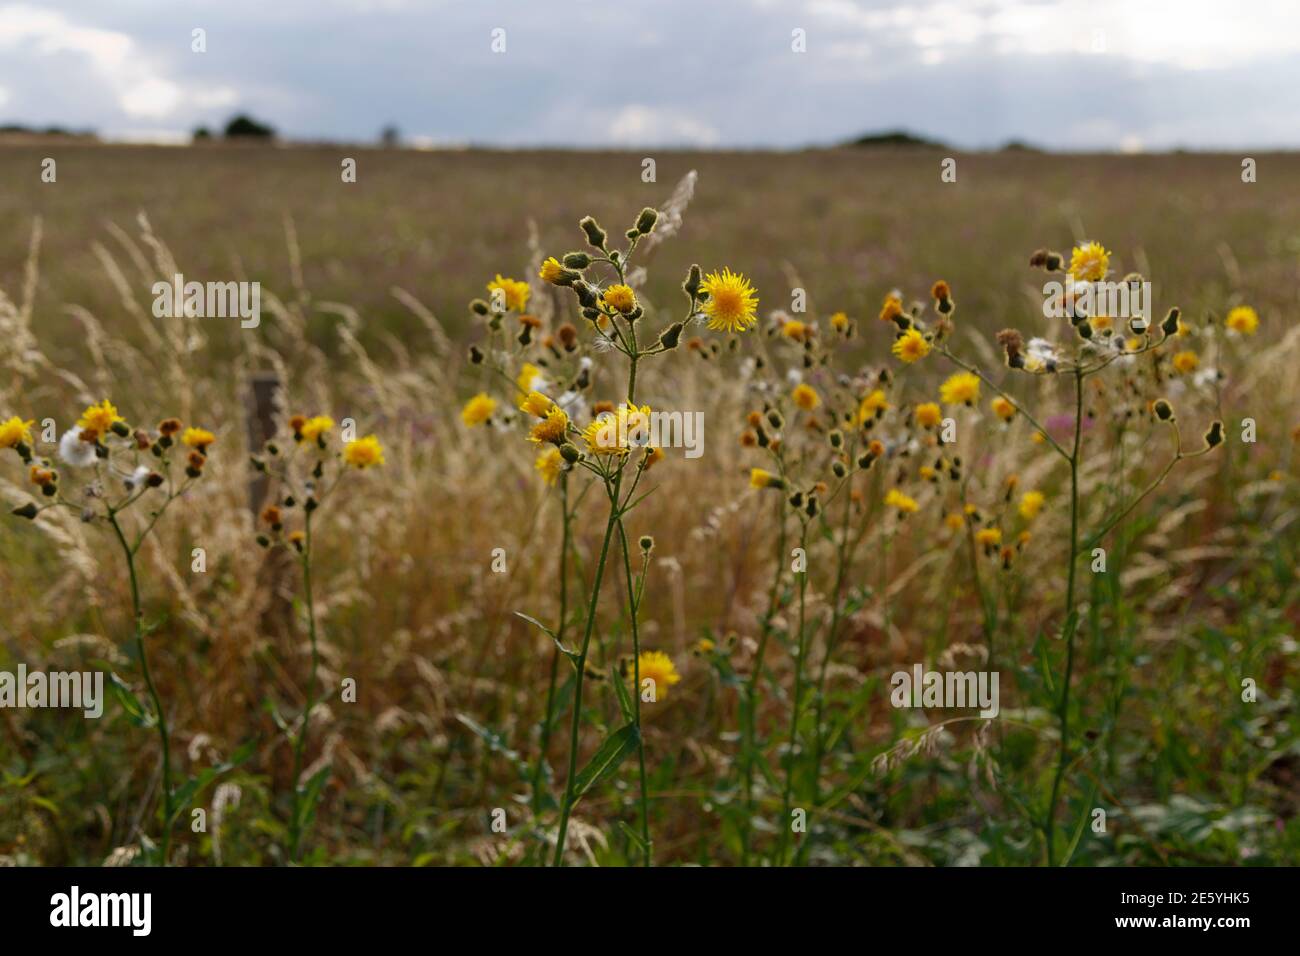 Dandelions in flower in the countryside against farmers field in Wiltshire Stock Photo